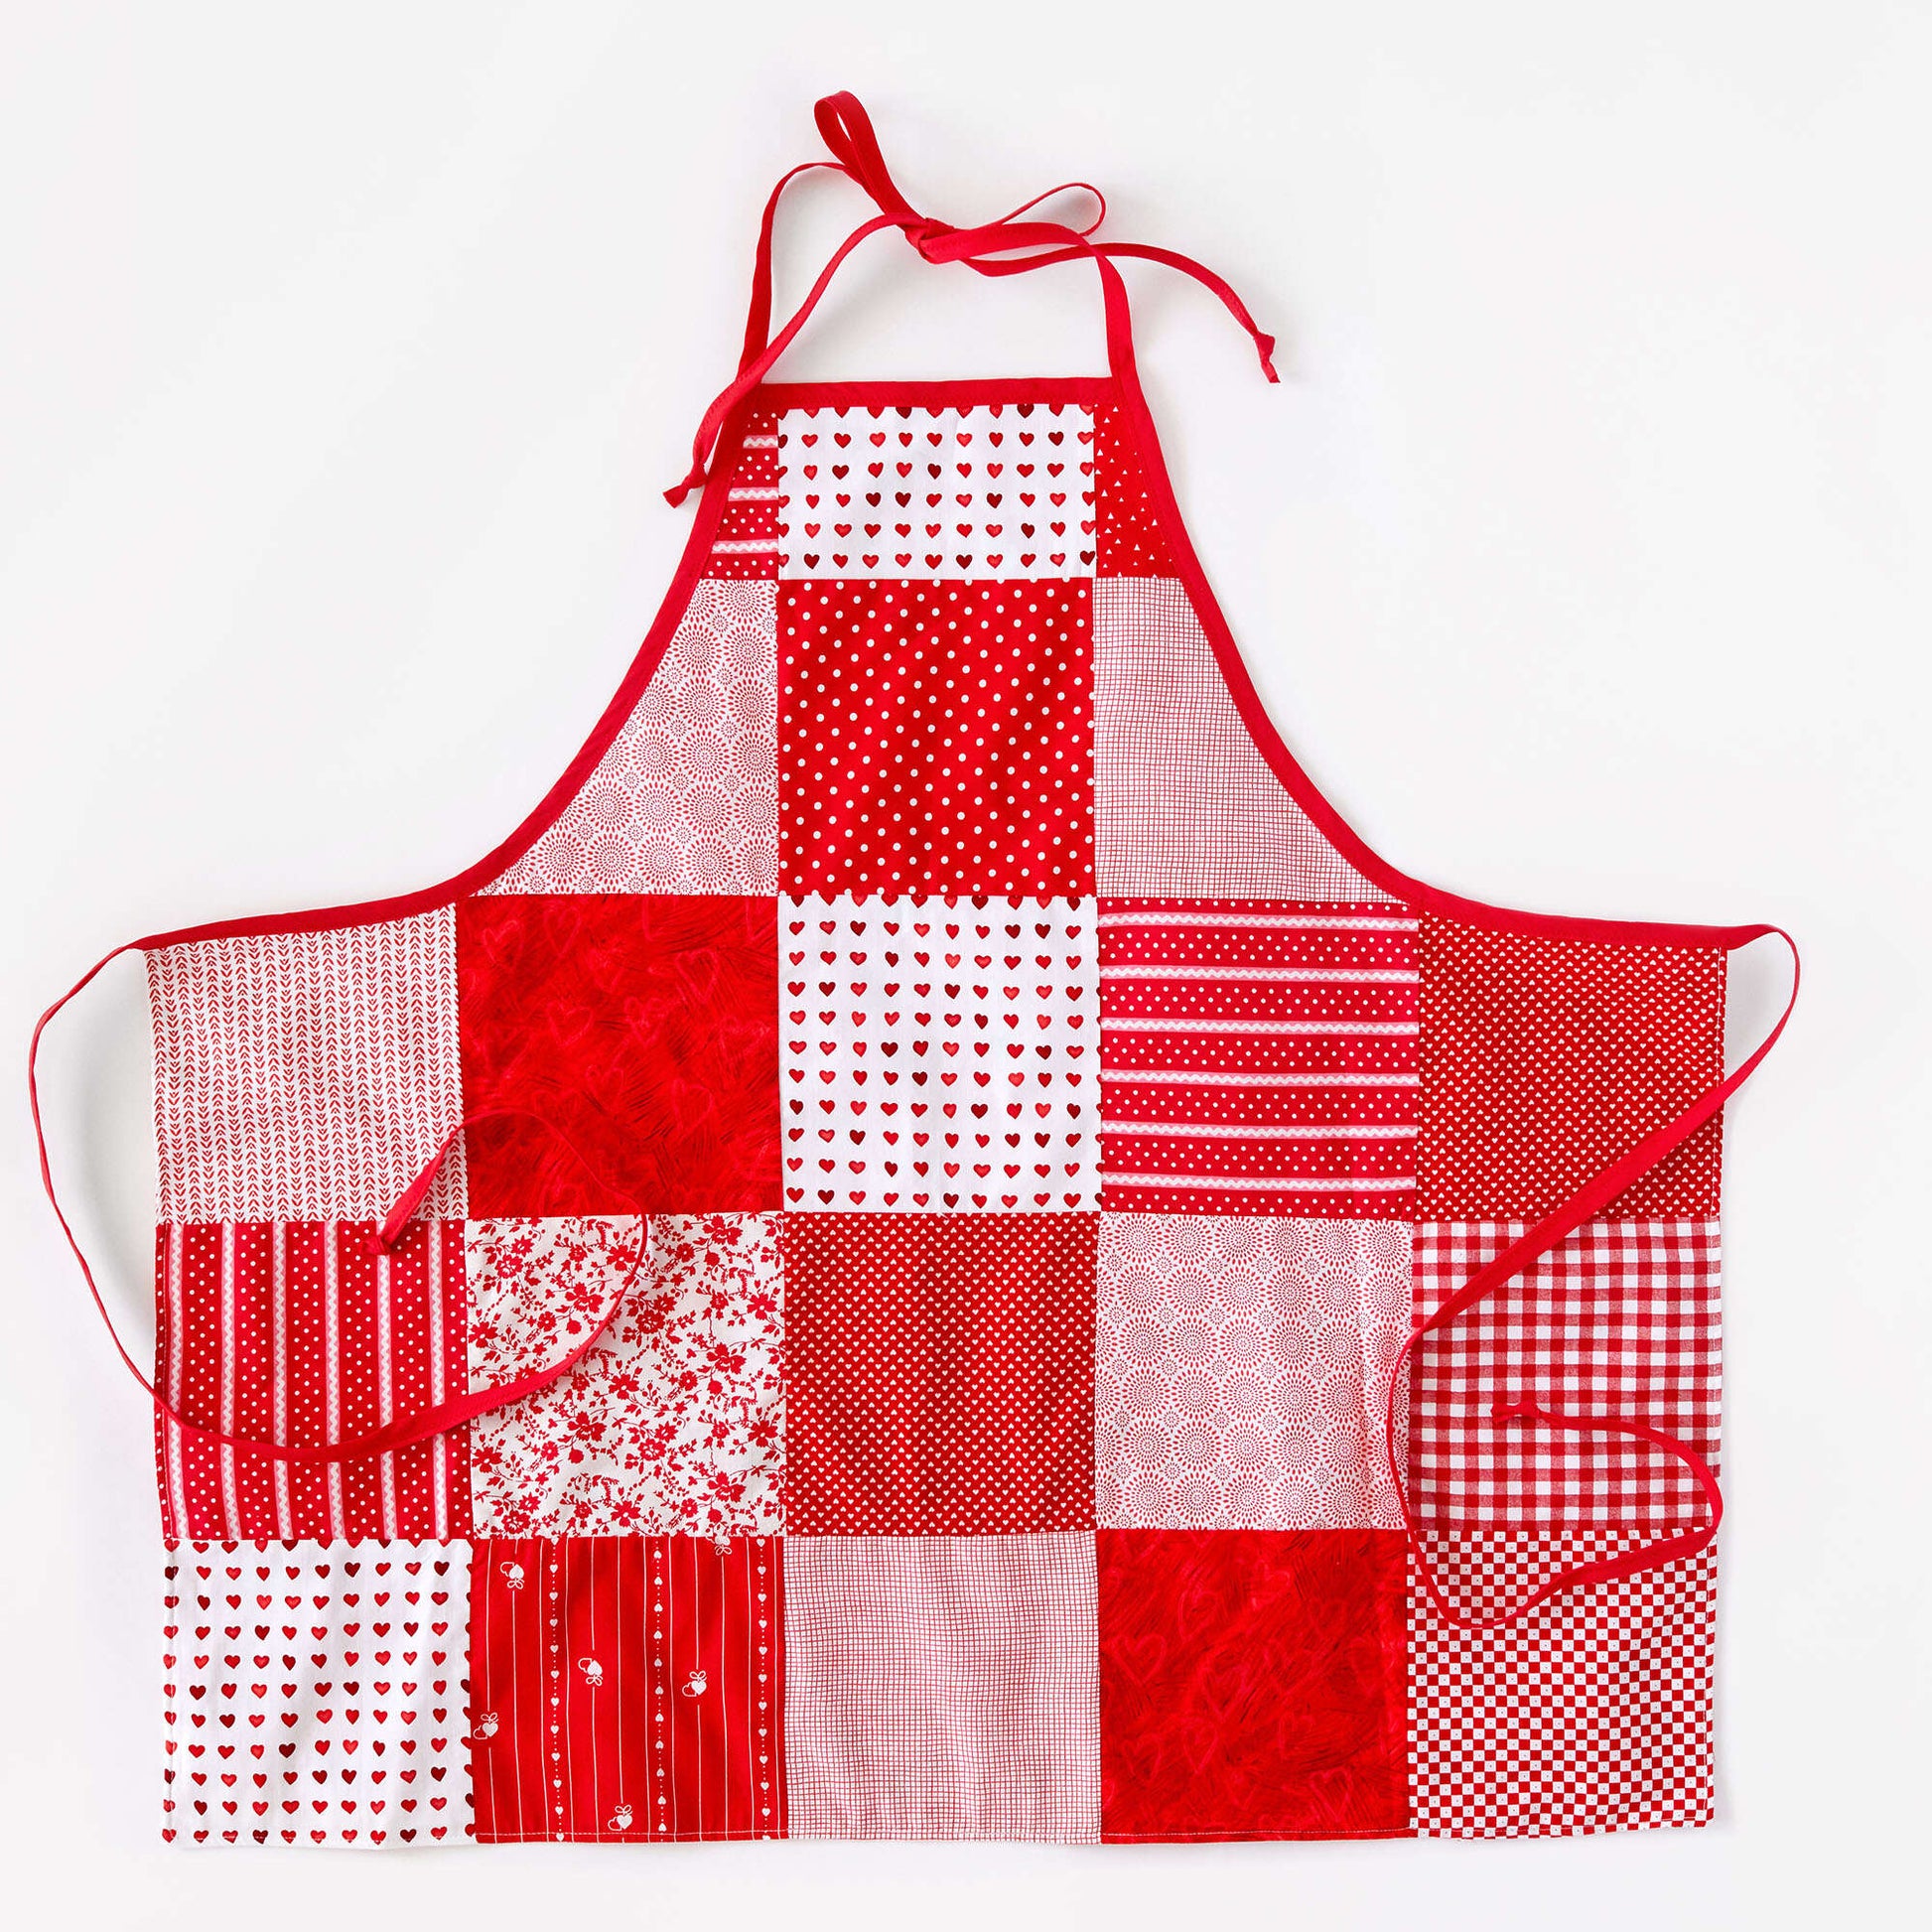 PrettyCat fabric kitchen apron with pocket (59.02.21) - Art From Italy